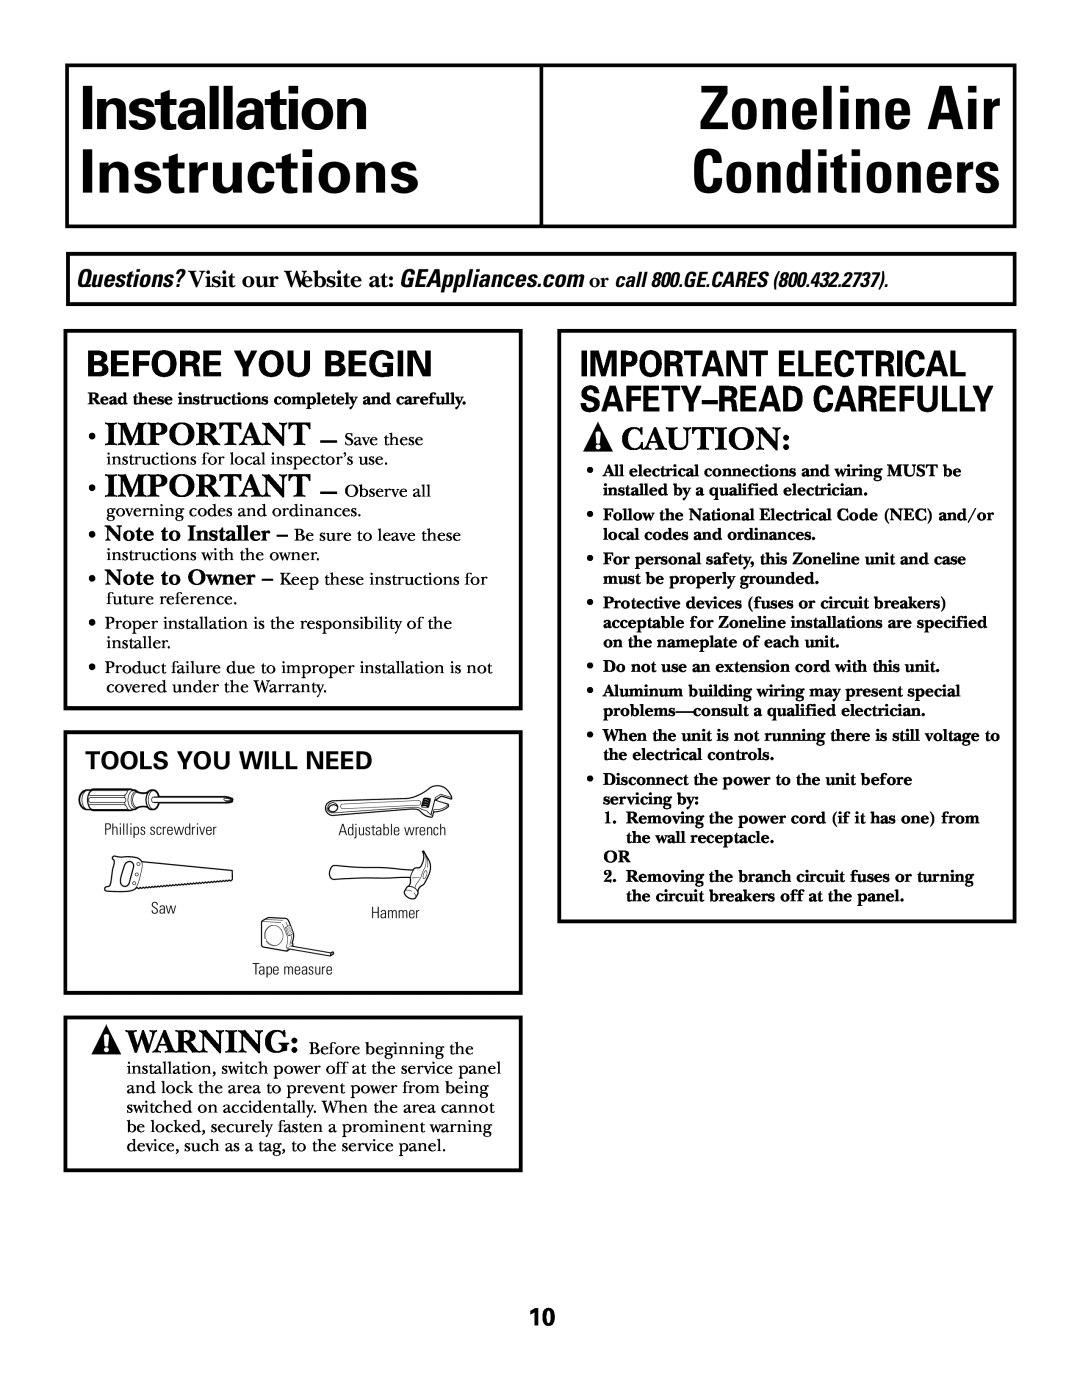 GE AZ75H18EAC, 49-7419-2 Before You Begin, Tools You Will Need, Installation Instructions, Zoneline Air Conditioners 